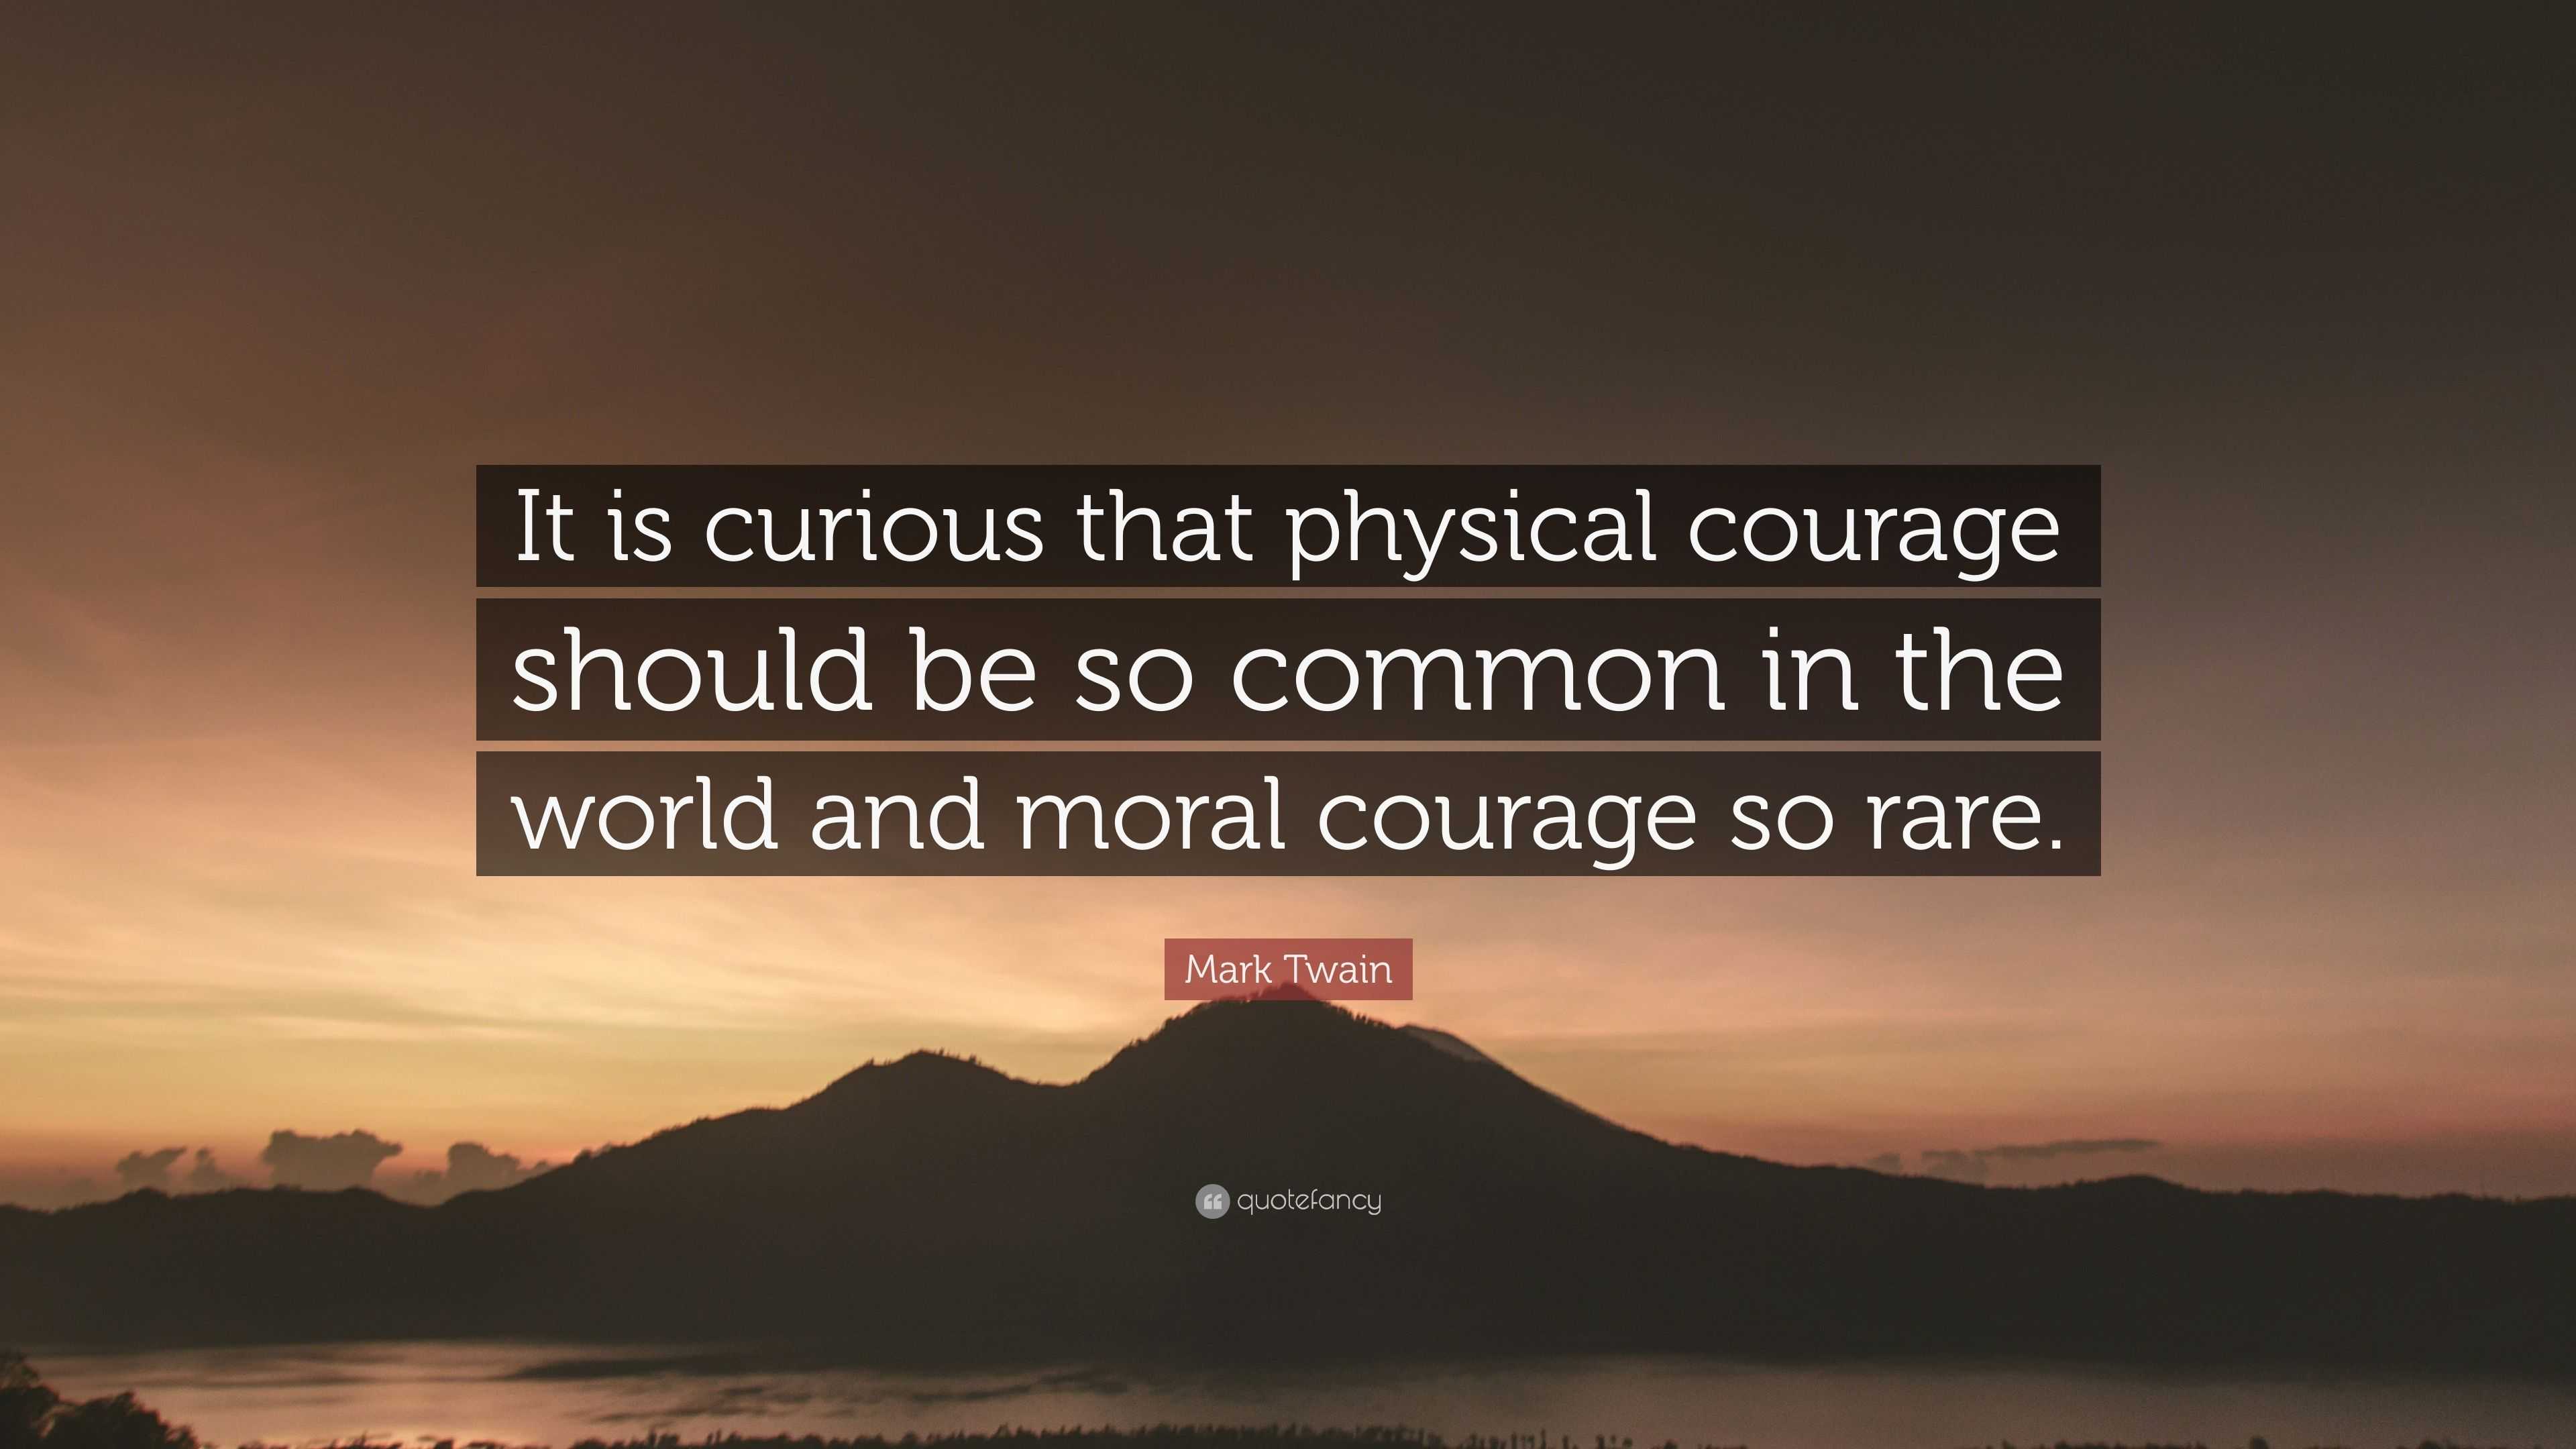 Mark Twain Quote: "It is curious that physical courage should be so common in the world and ...